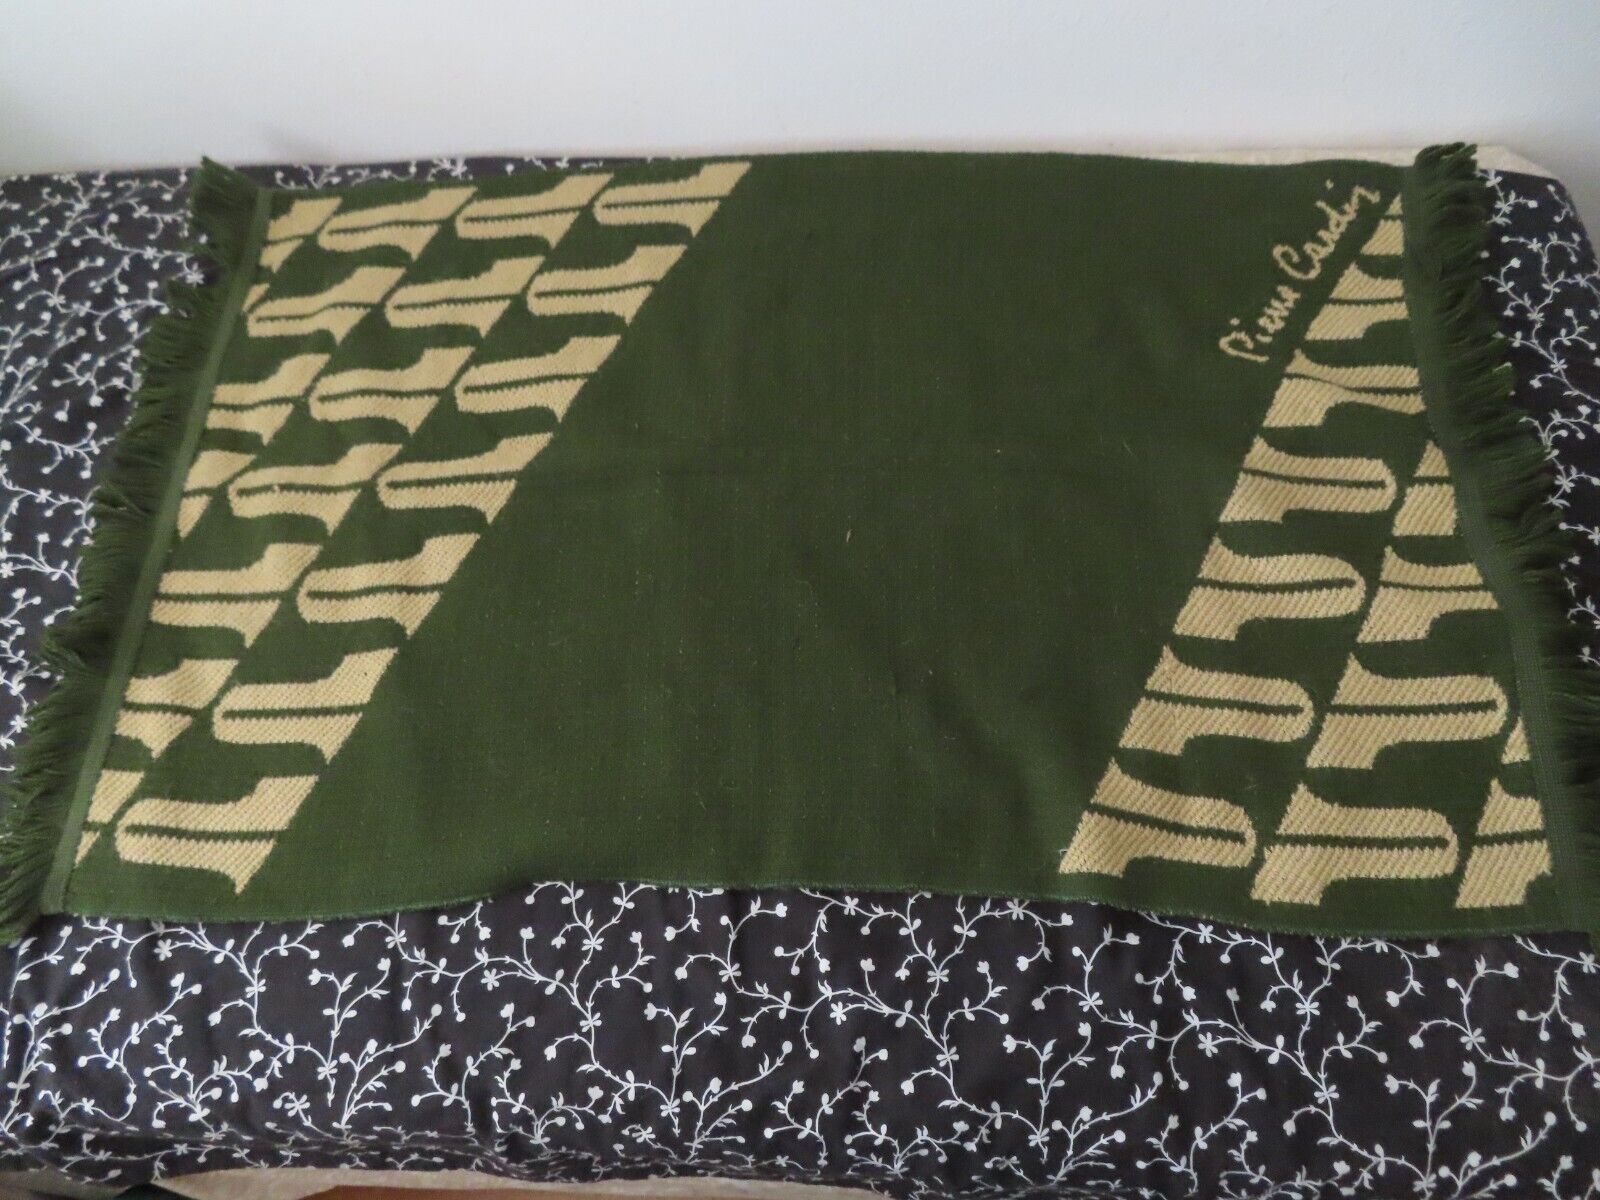 extremely rare pierre cardin made by matsumoto throw blanket 60s iconic